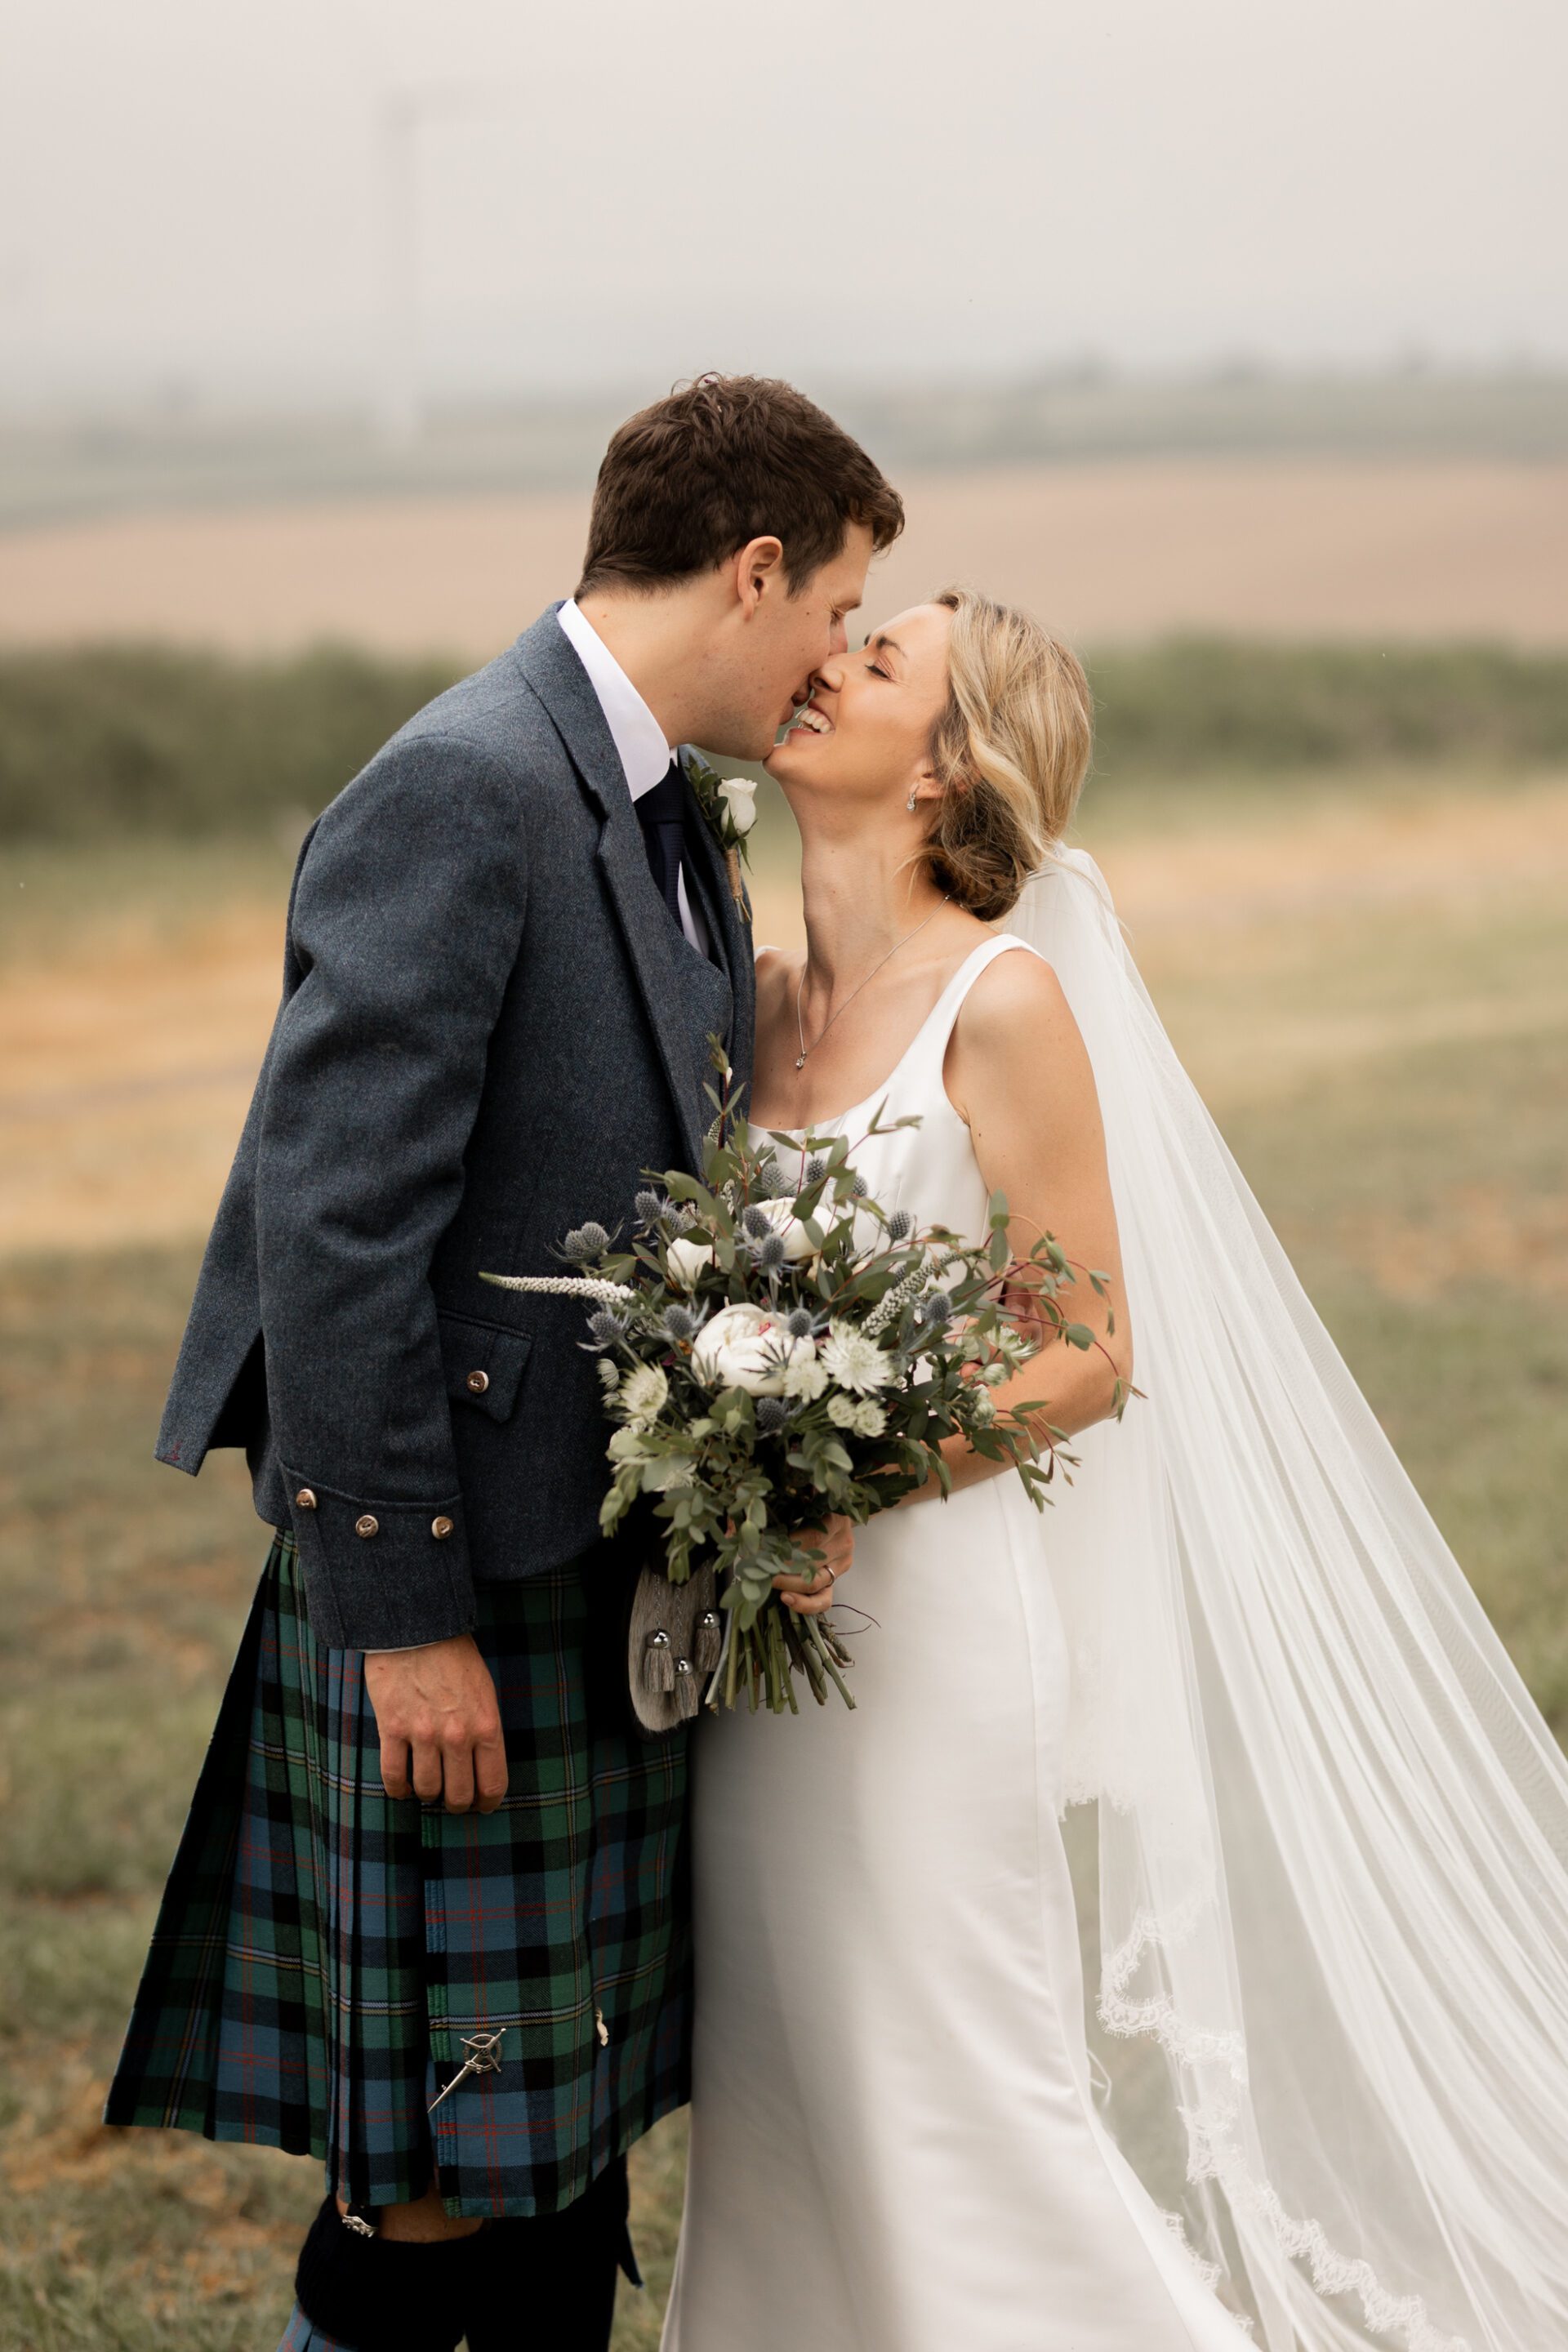 The bride and groom share a kiss after their Devon church wedding ceremony